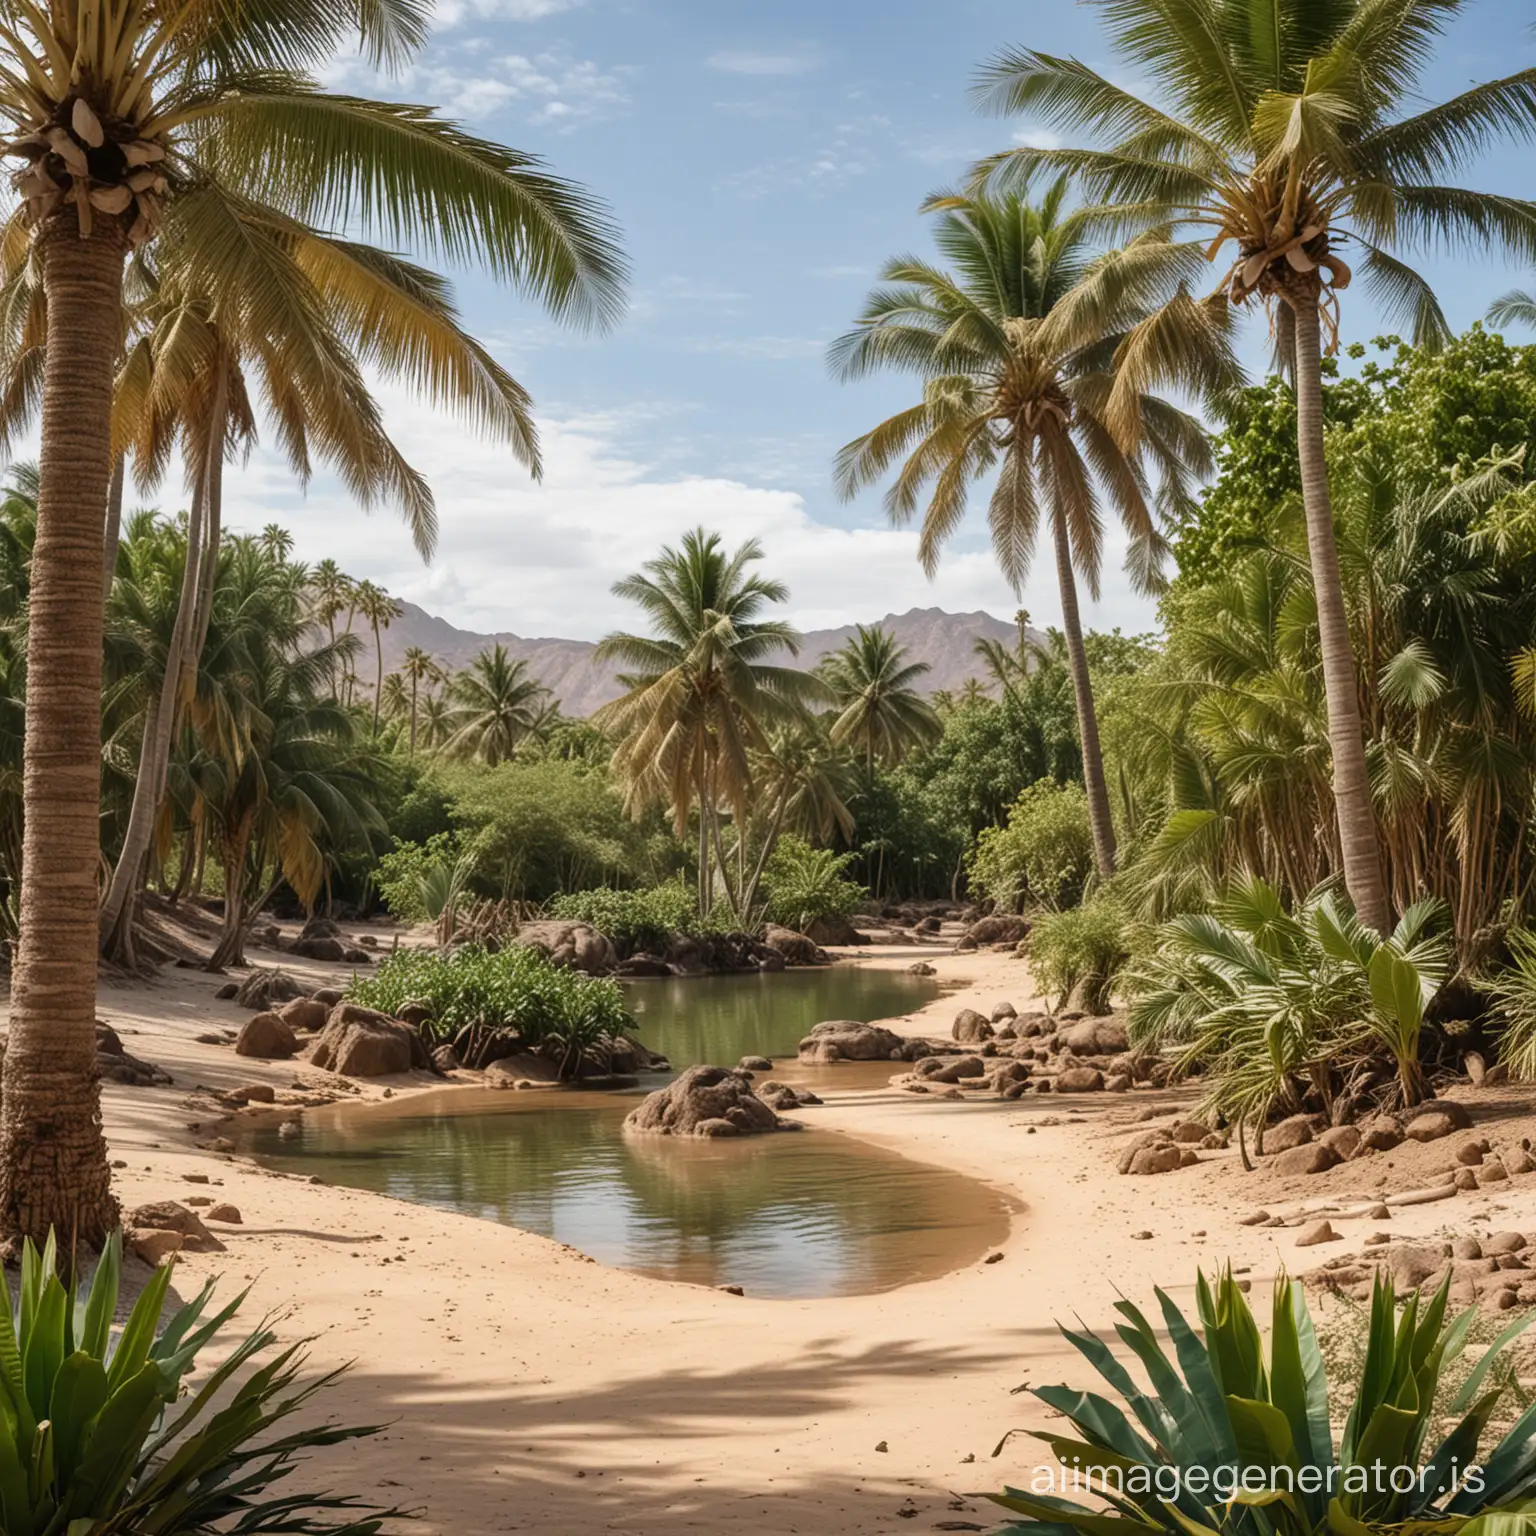 desert with a small oasis and coconut palms and banana trees